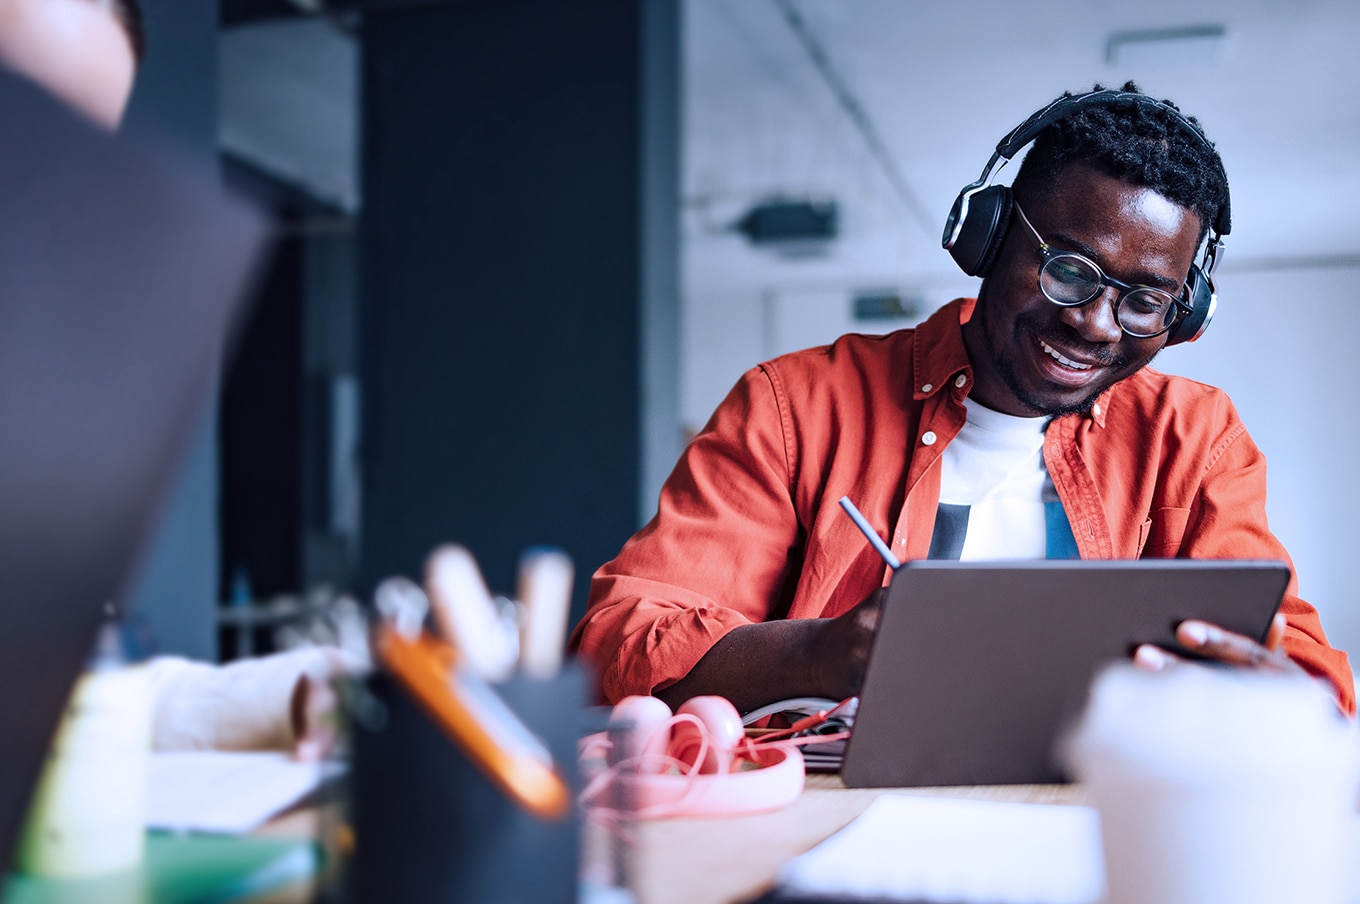 viant-adelphic-dsp-certification-smiling black male student with headphones studying